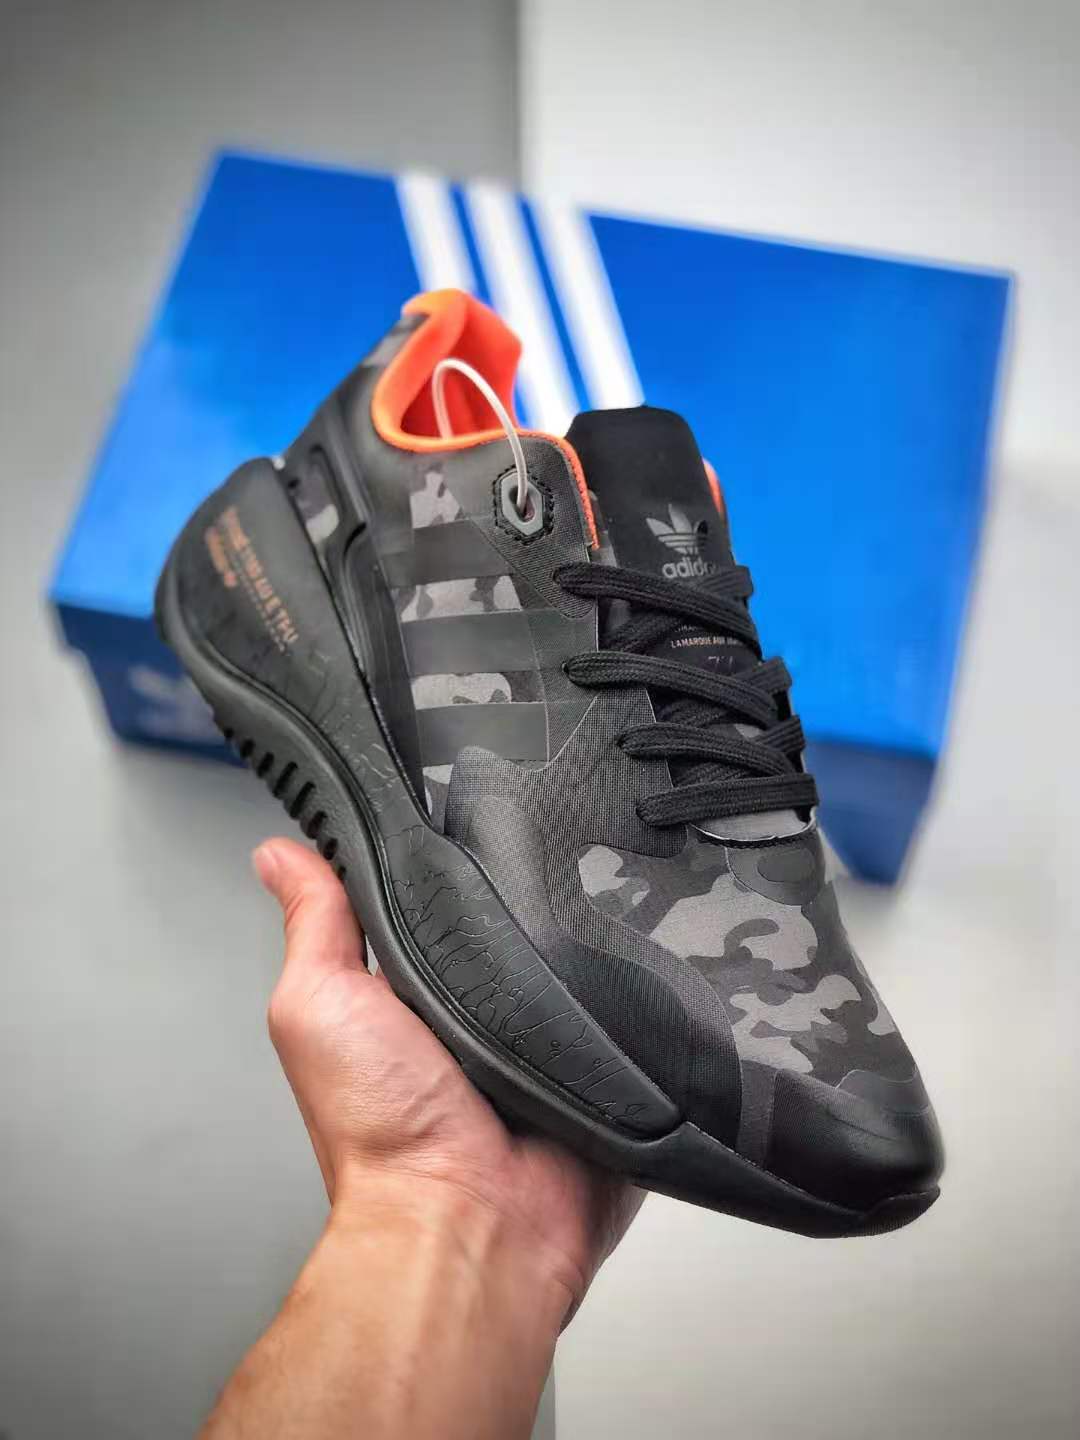 Adidas ZX Alkyne GZ8913: Explore the Iconic Originals Collection!